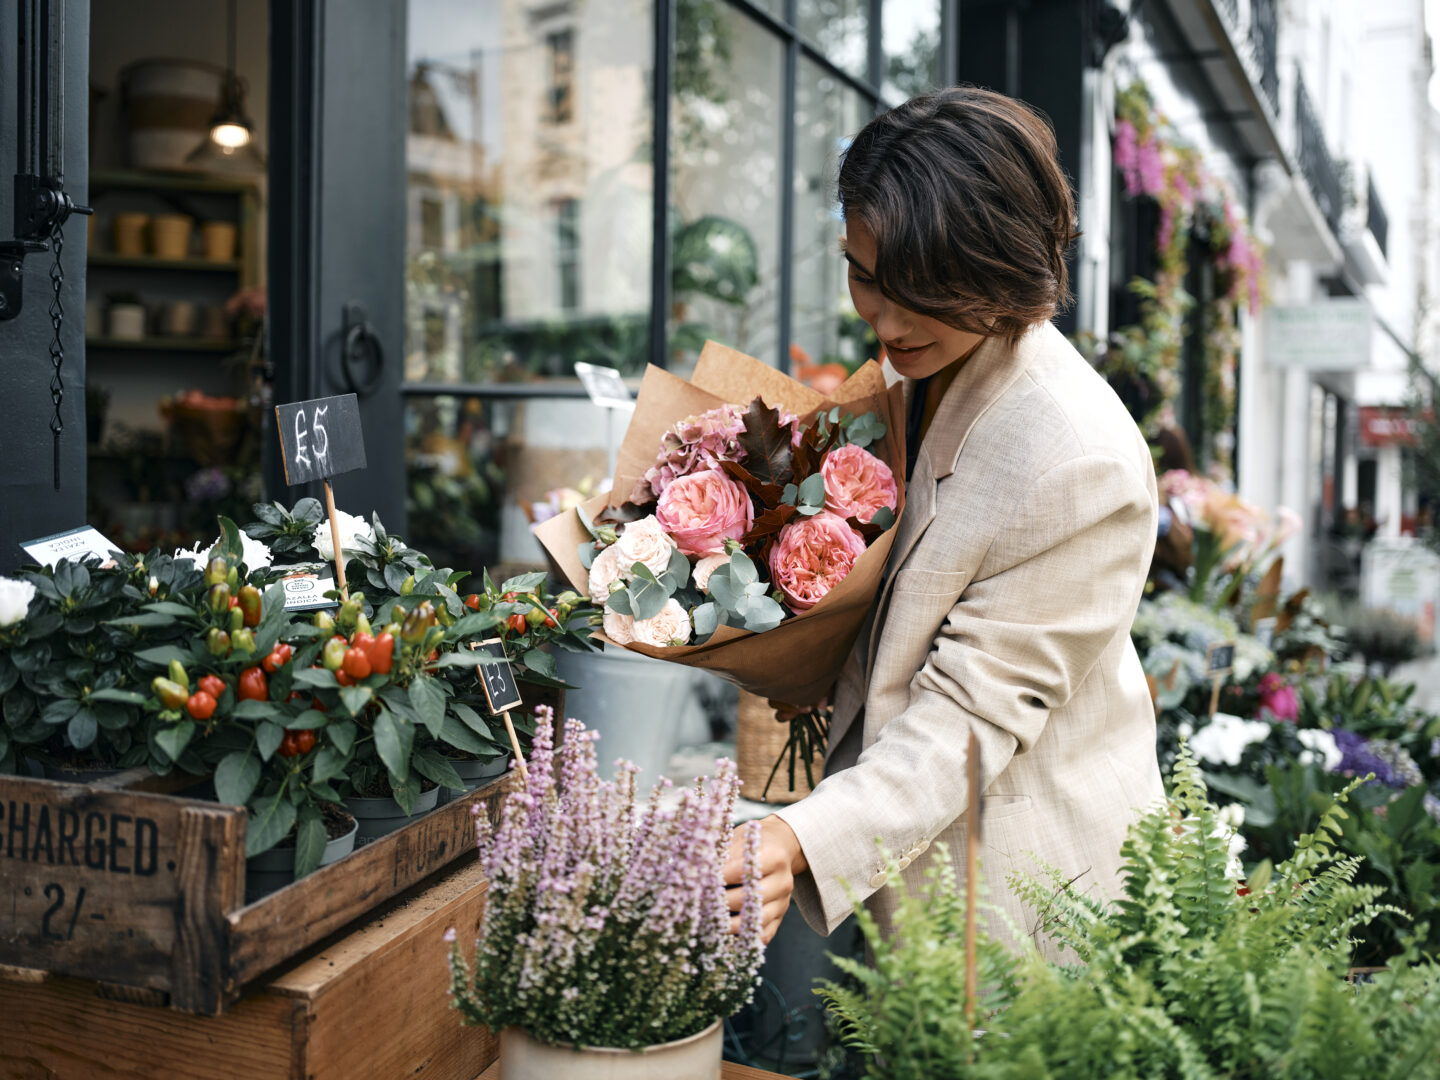 Woman selects flowers at Orchard Place